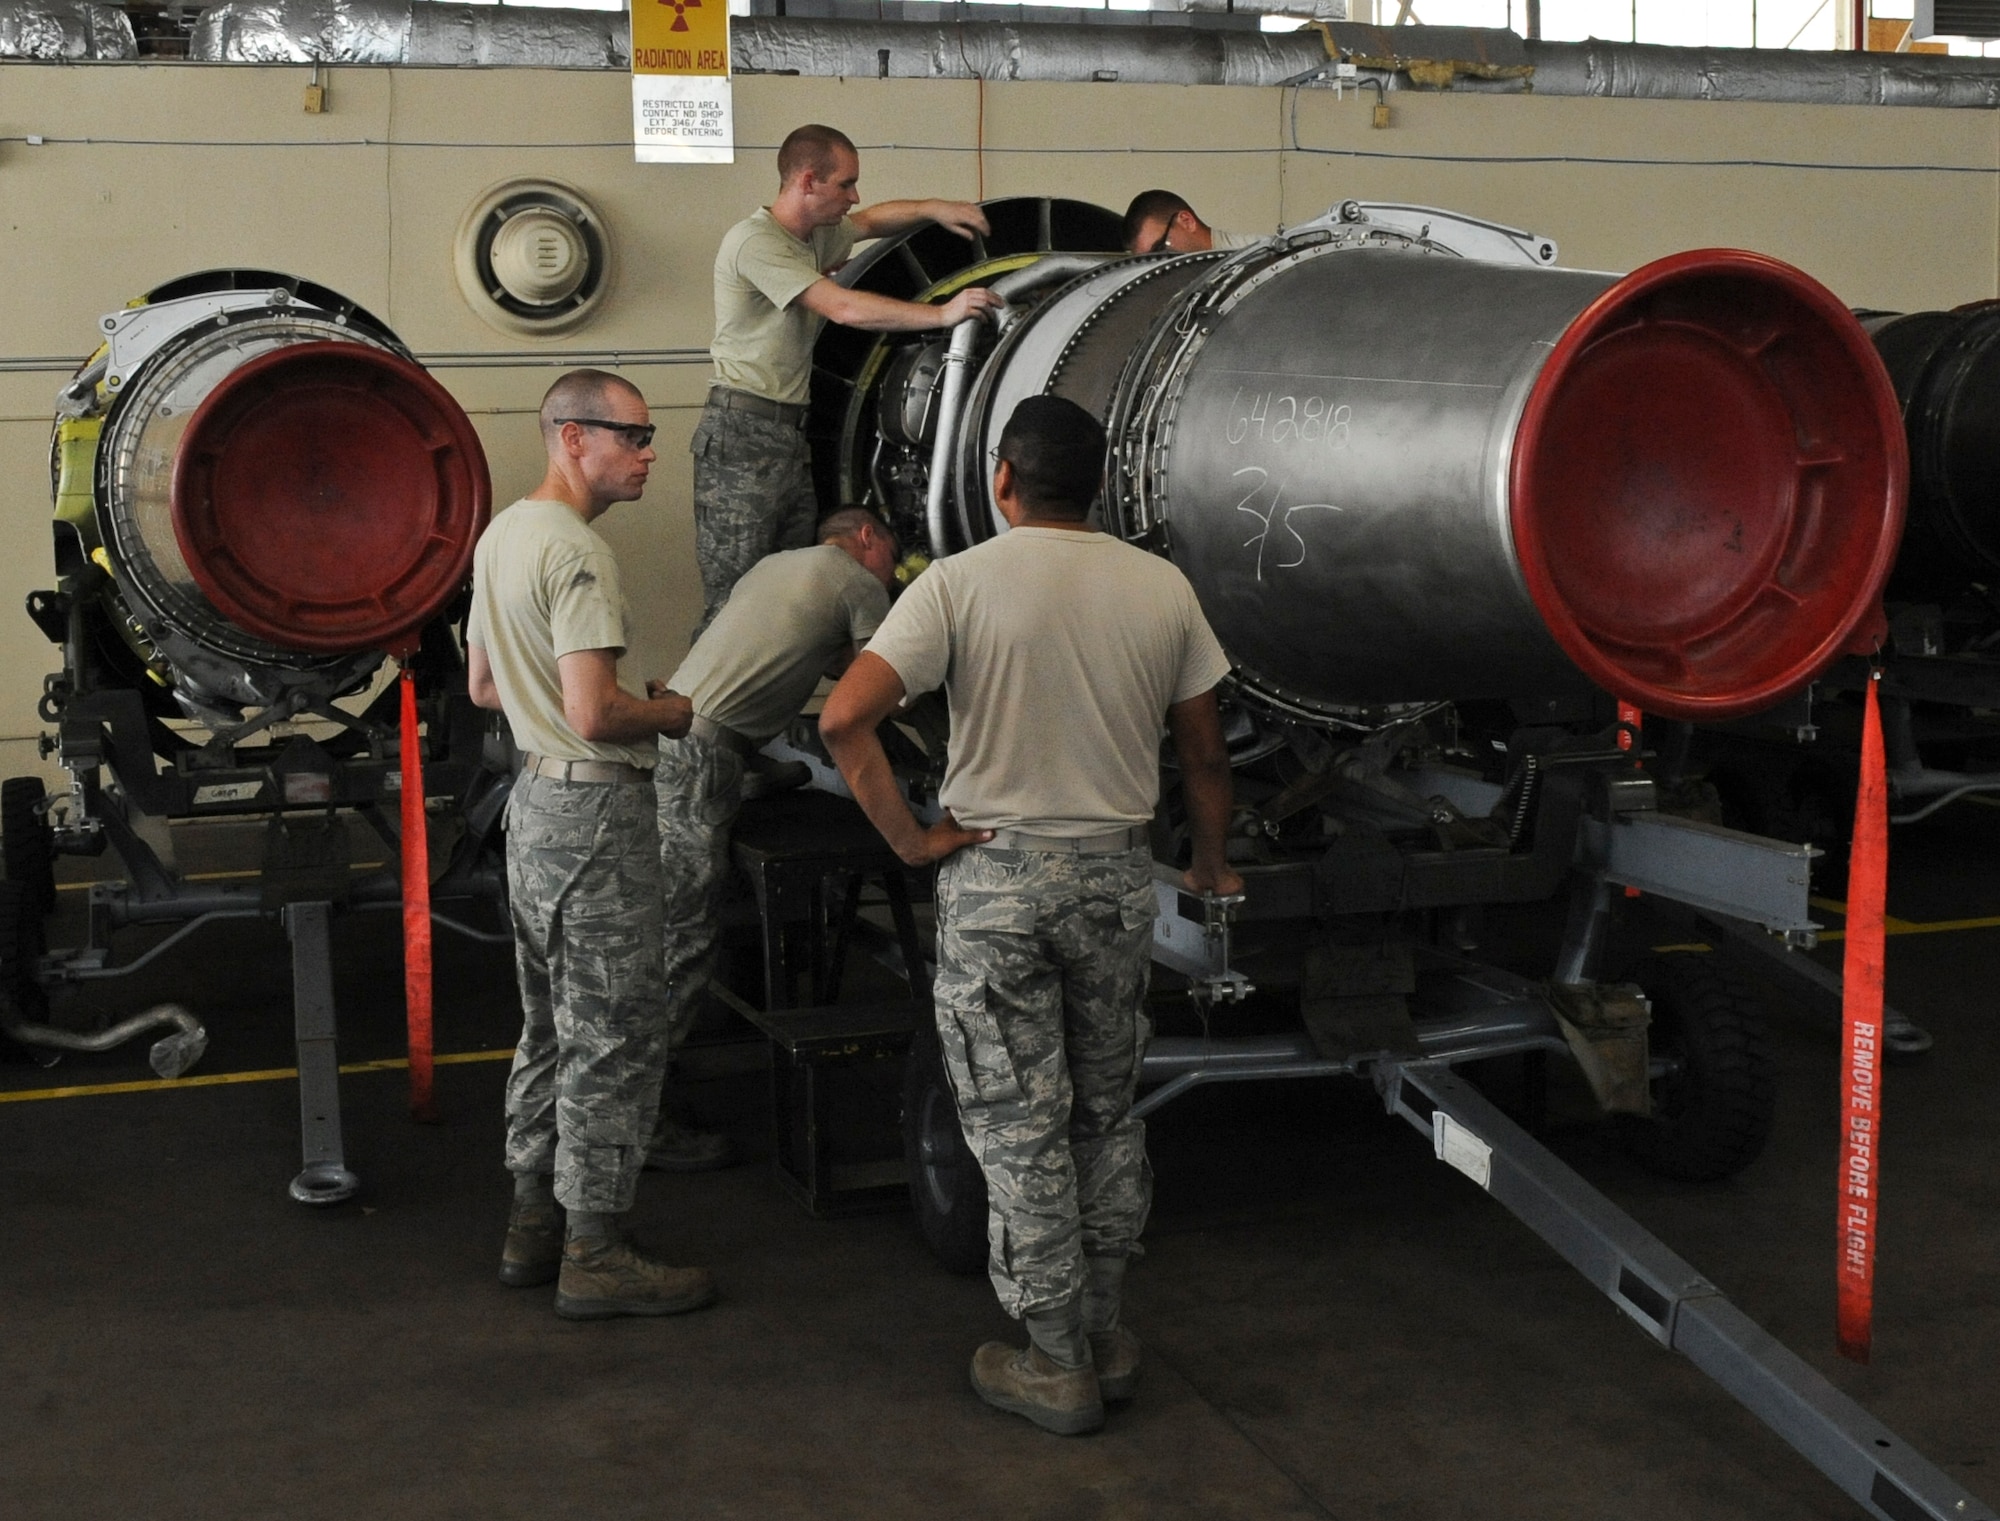 Airmen from the 2nd Maintenance Squadron Propulsion Flight work on a TF33/P-103 turbofan engine on Barksdale Air Force Base, La., Aug. 13. The engine was shipped from the Maintenance Depot at Tinker AFB, Okla., where all TF33/P-103 turbofan engines go for scheduled and major maintenance. The B-52H Stratofortress uses eight TF33/P-103 turbofan engines, each capable of producing 17,000 pounds of thrust.  (U.S. Air Force photo/Airman 1st Class Micaiah Anthony)(RELEASED)